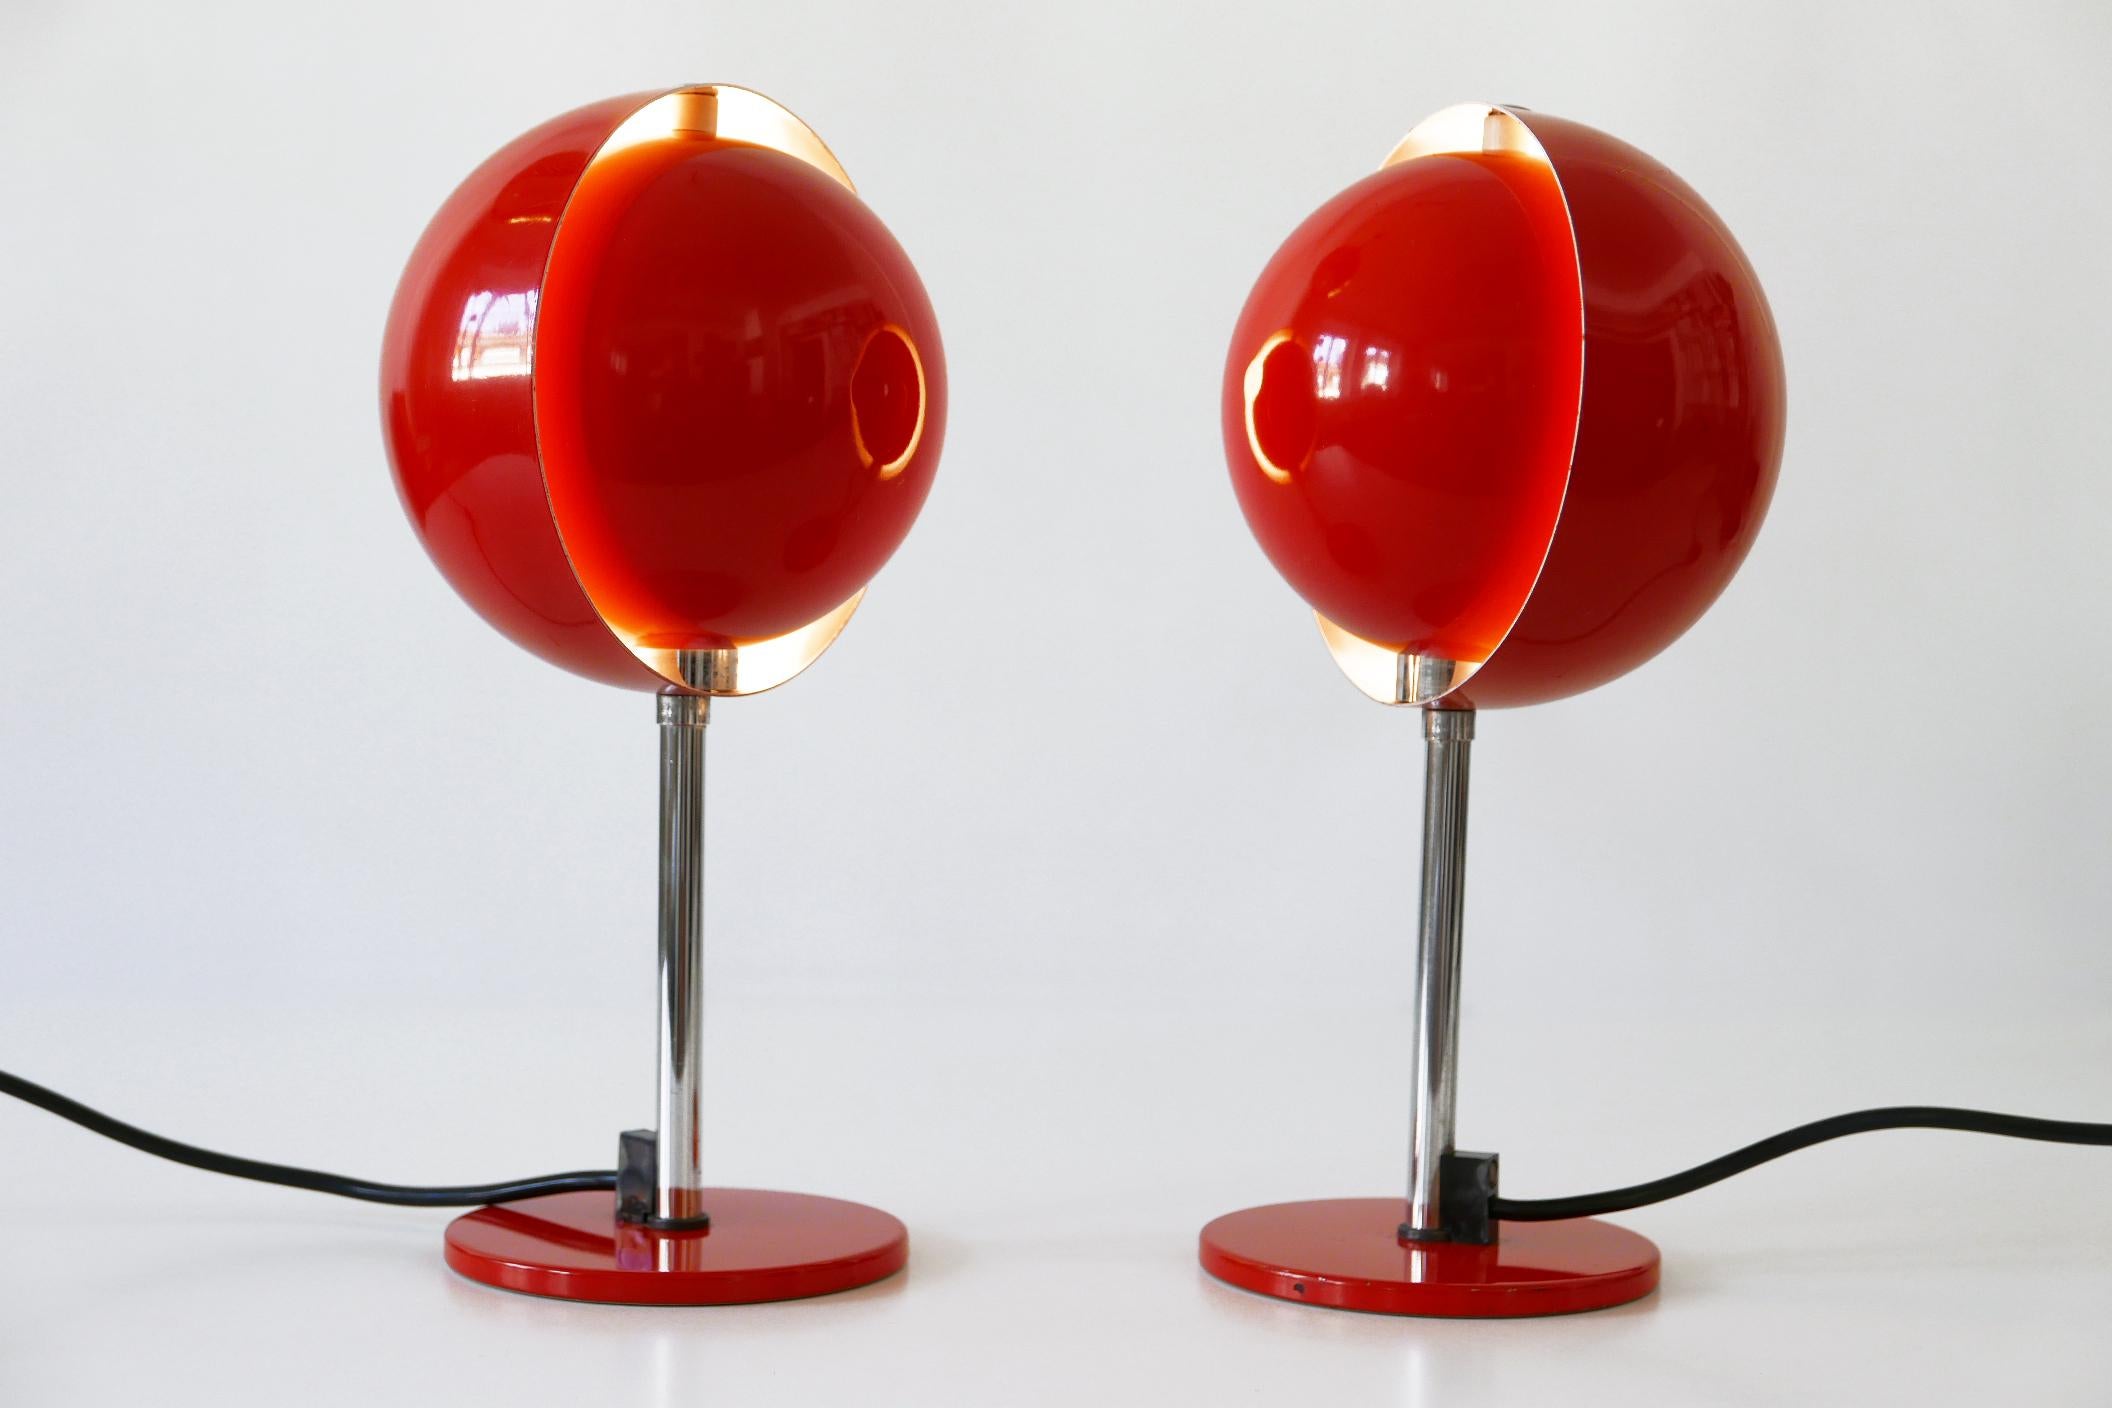 Enameled Set of Two Mid-Century Modern Moon Table Lamps by Hustadt-Leuchten 1960s Germany For Sale